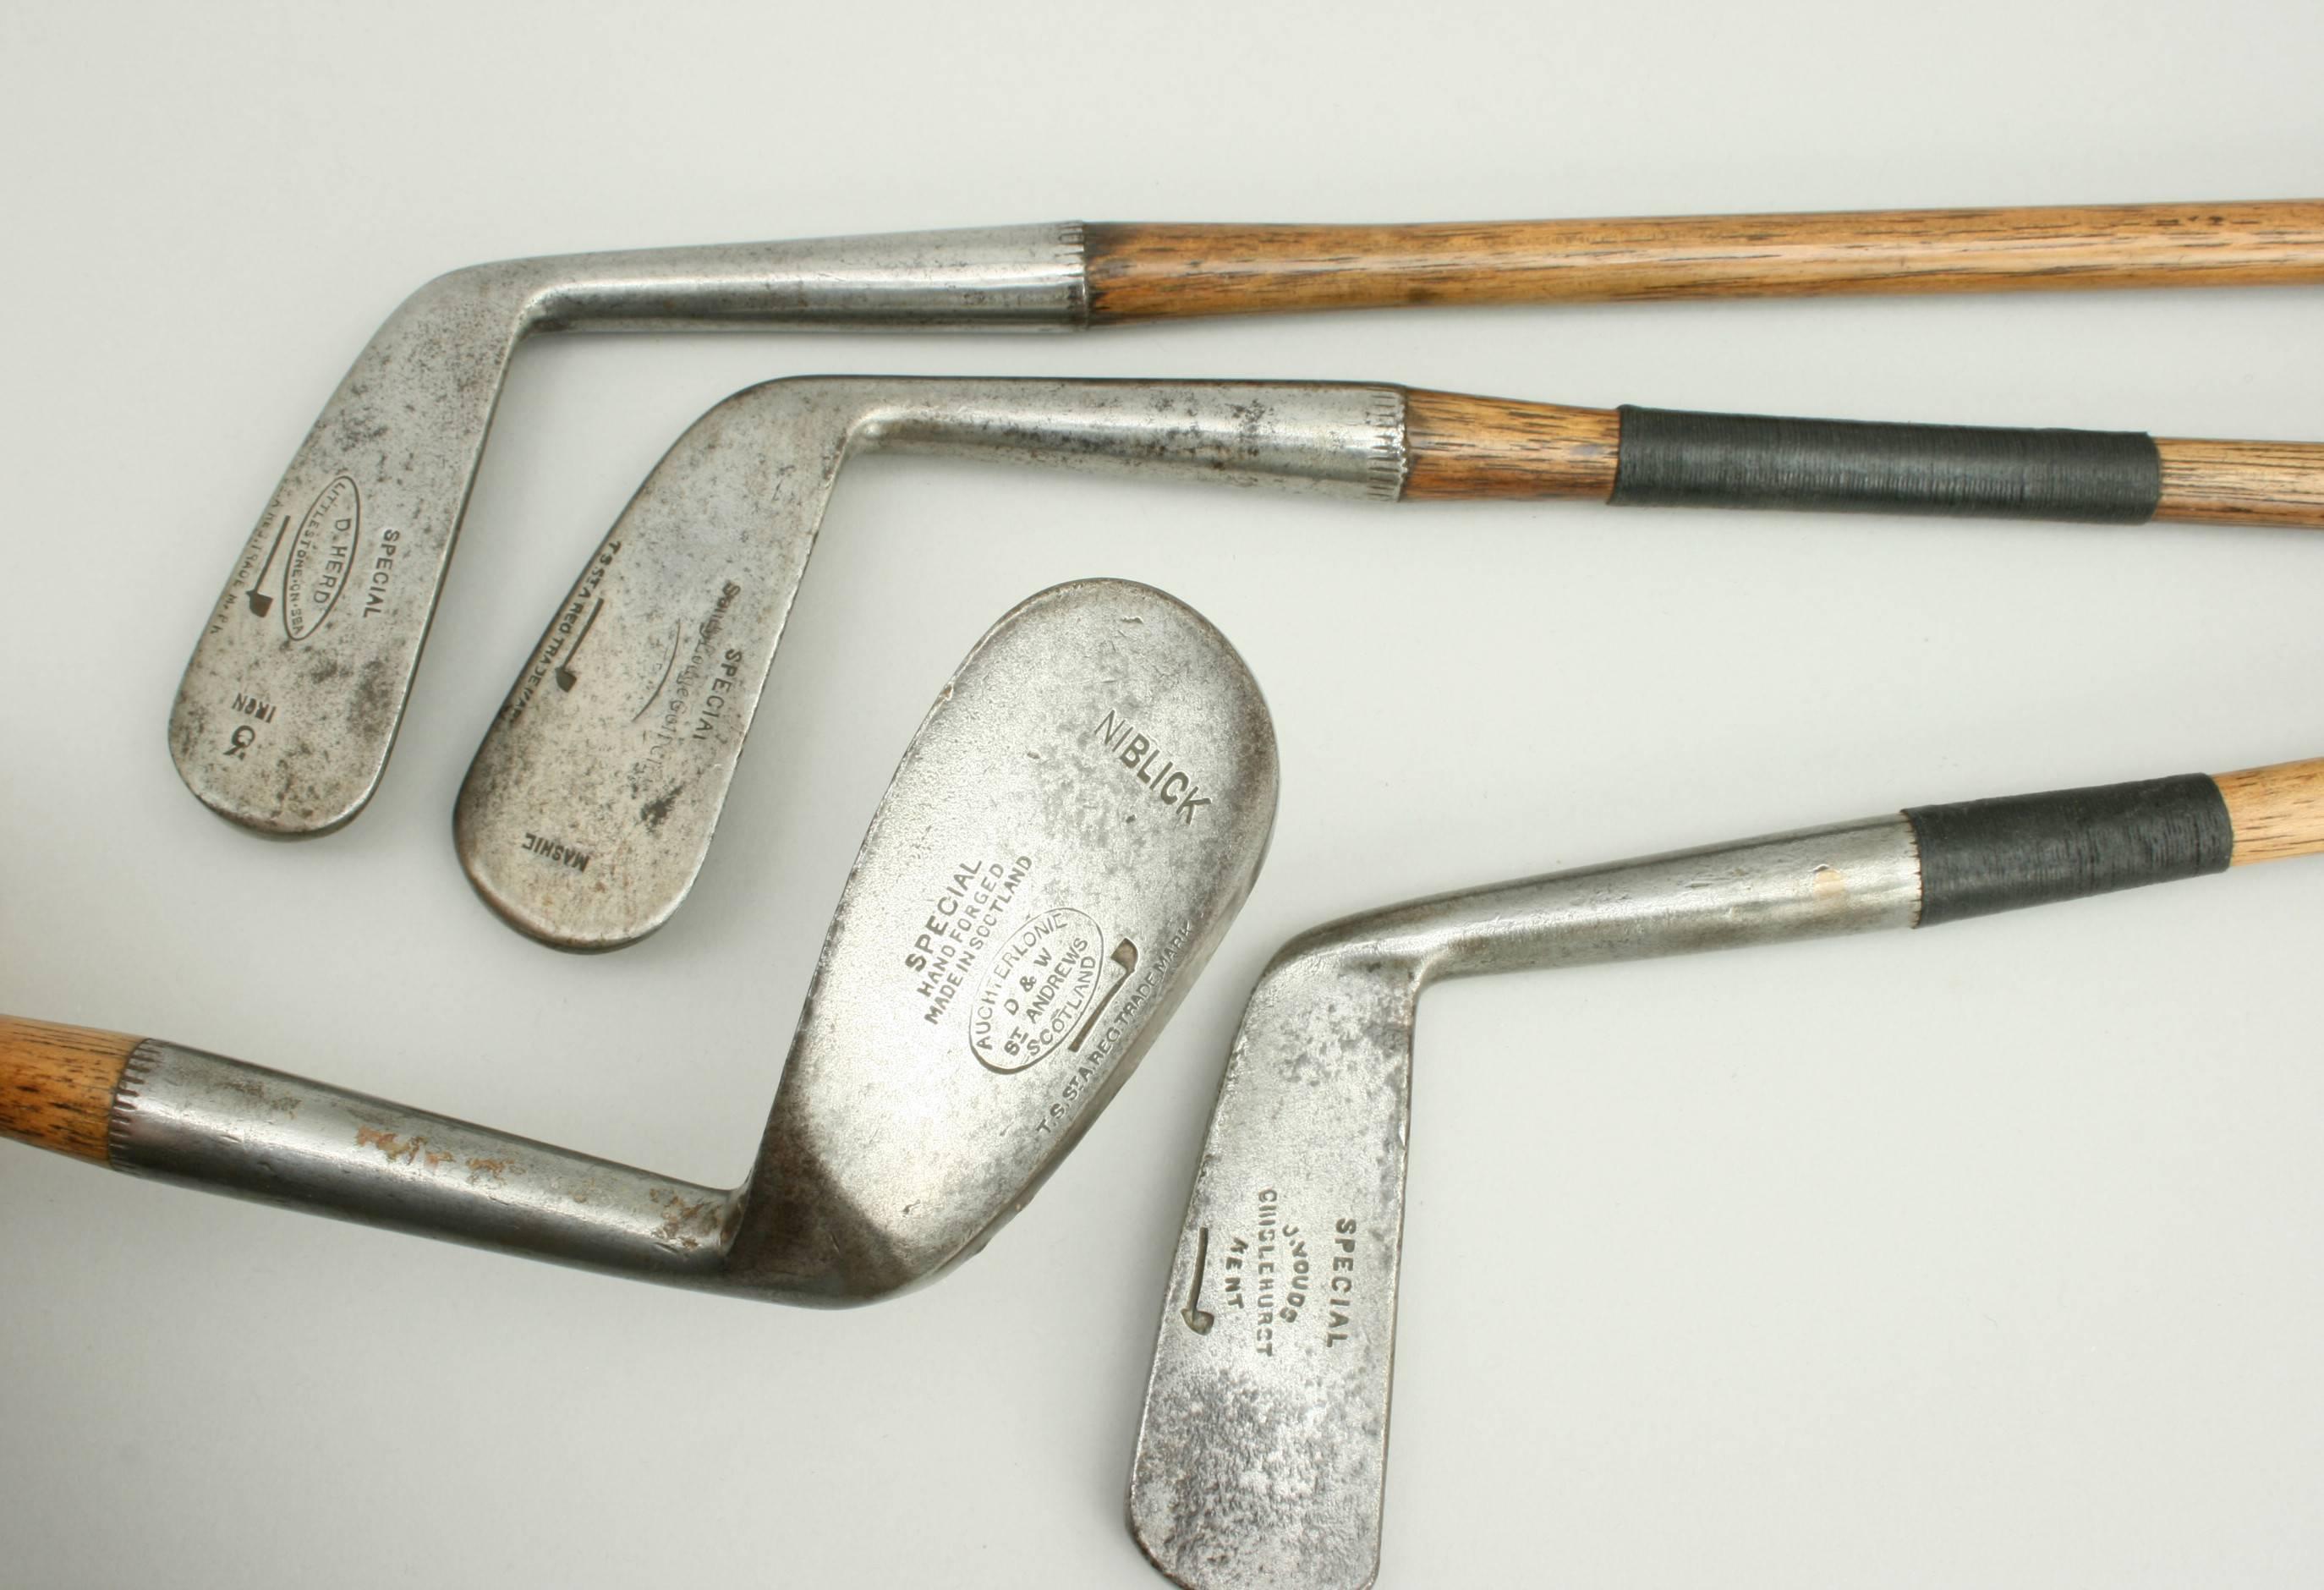 A good set of five matched hickory shafted golf clubs. The set comprises of a Brassie, No. 3 Iron, Mashie, Niblick and a Blade Putter. Each iron club head is with the 'PIPE' cleek mark of Tom Stewart with the phrase 'T.S.St.A.REG.TRADEMARK', the